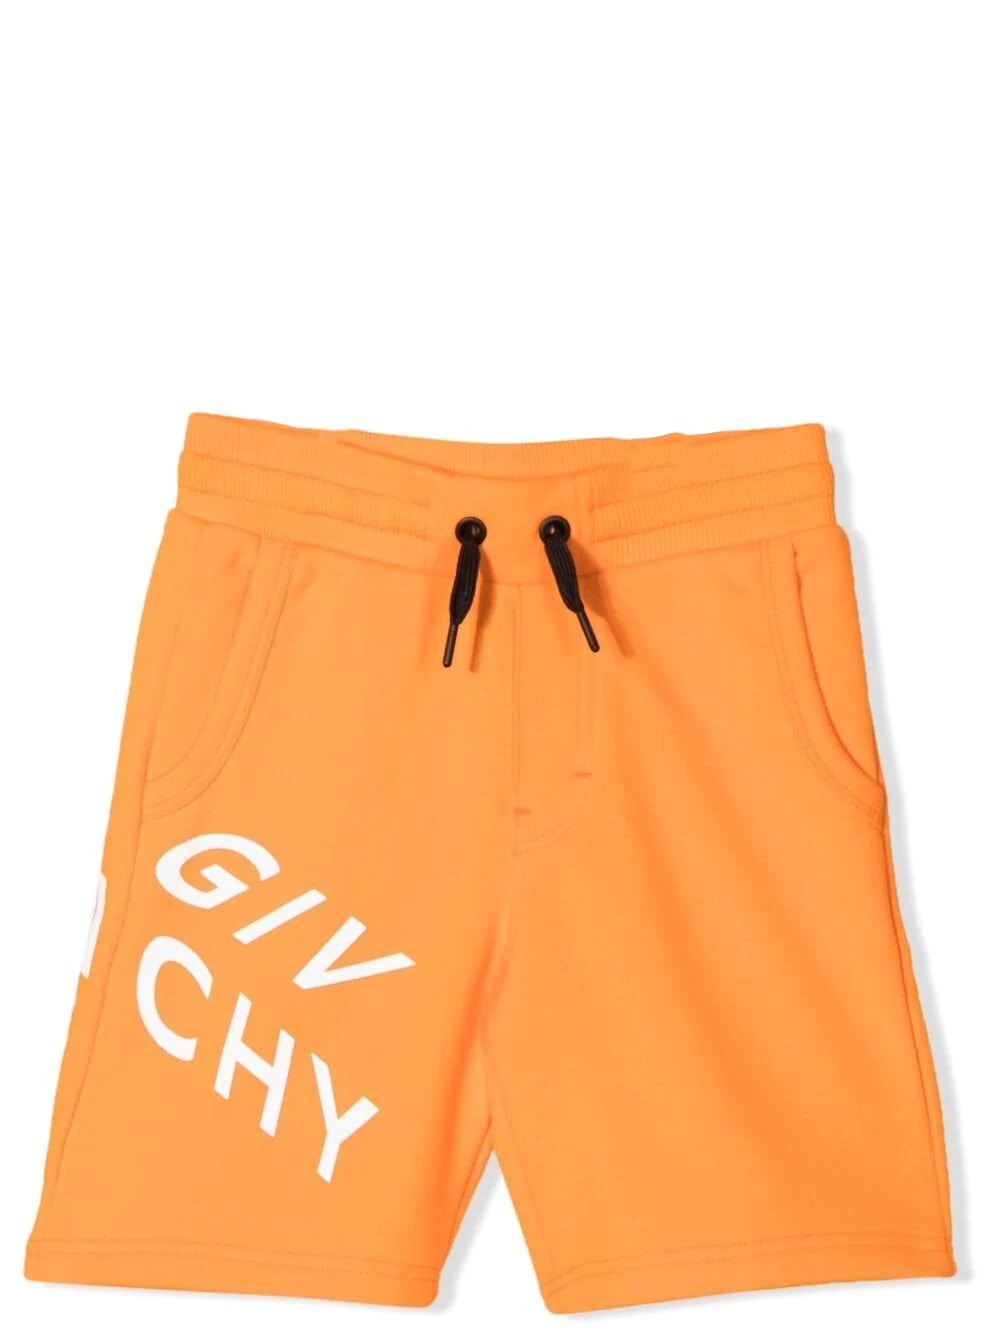 GIVENCHY SHORTS WITH PRIN,H24119 41E